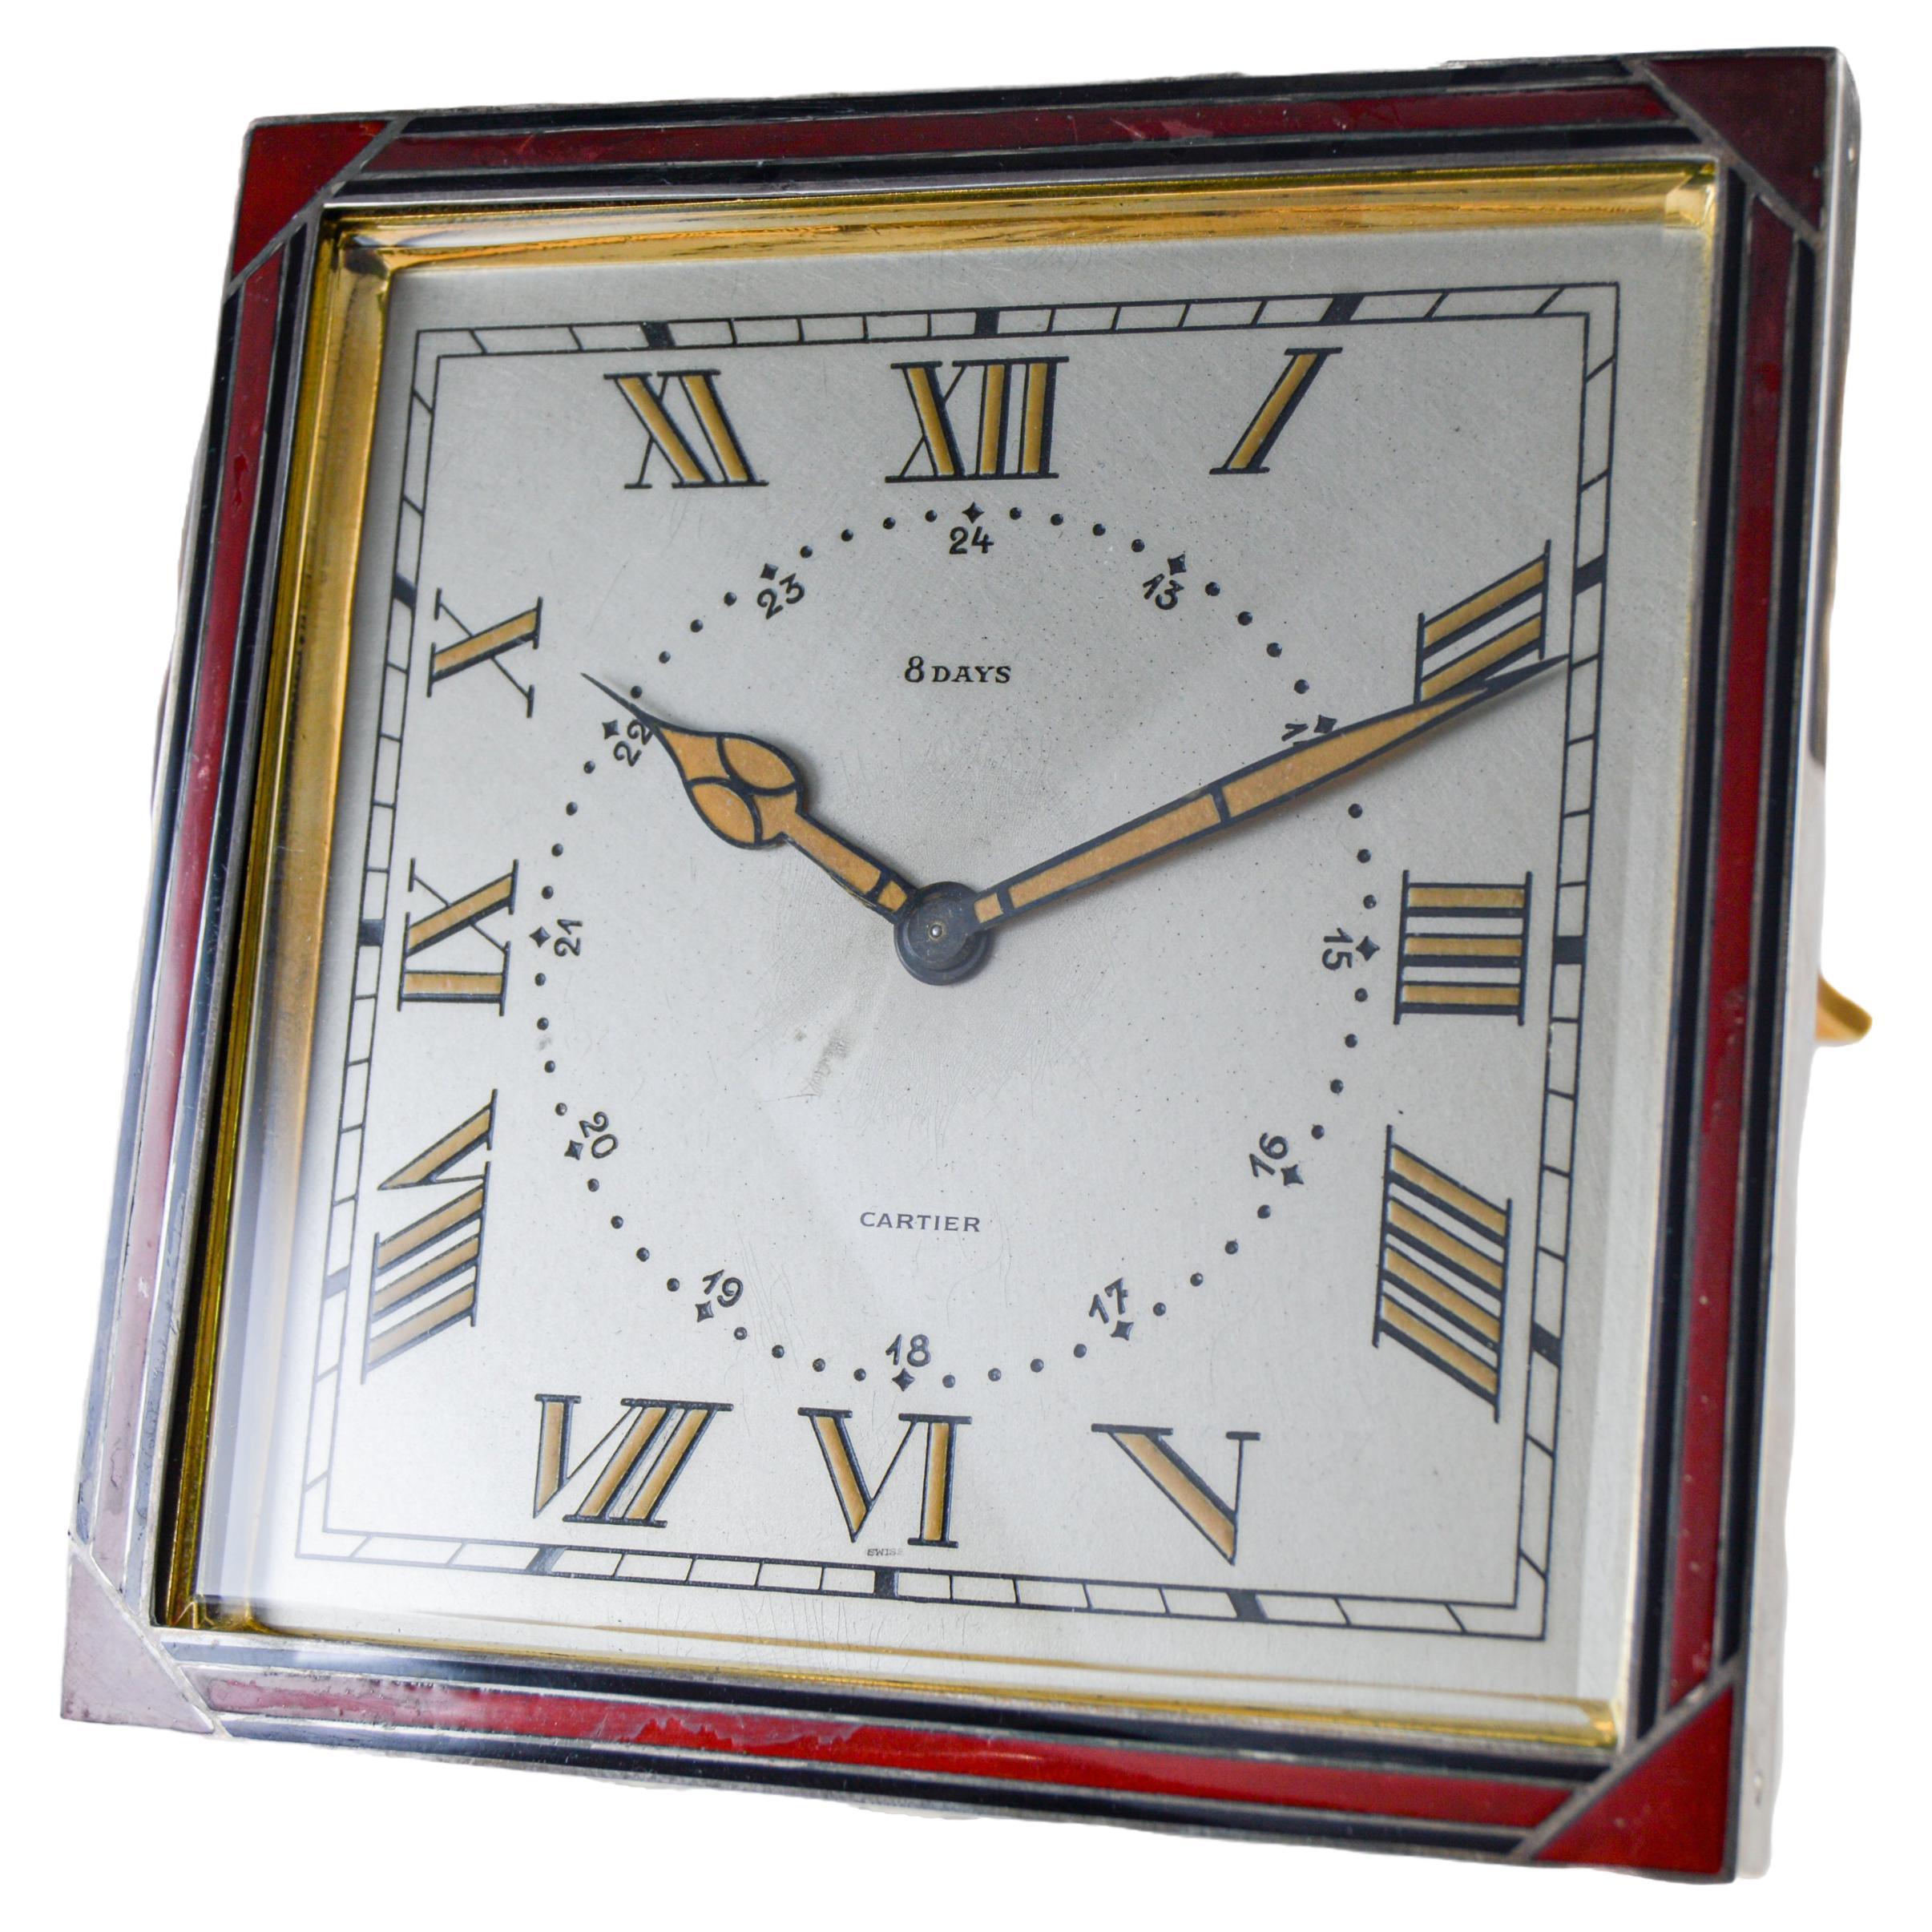 Cartier Sterling and Enamel Art Deco Desk Clock with Breguet Engine Turned Dial